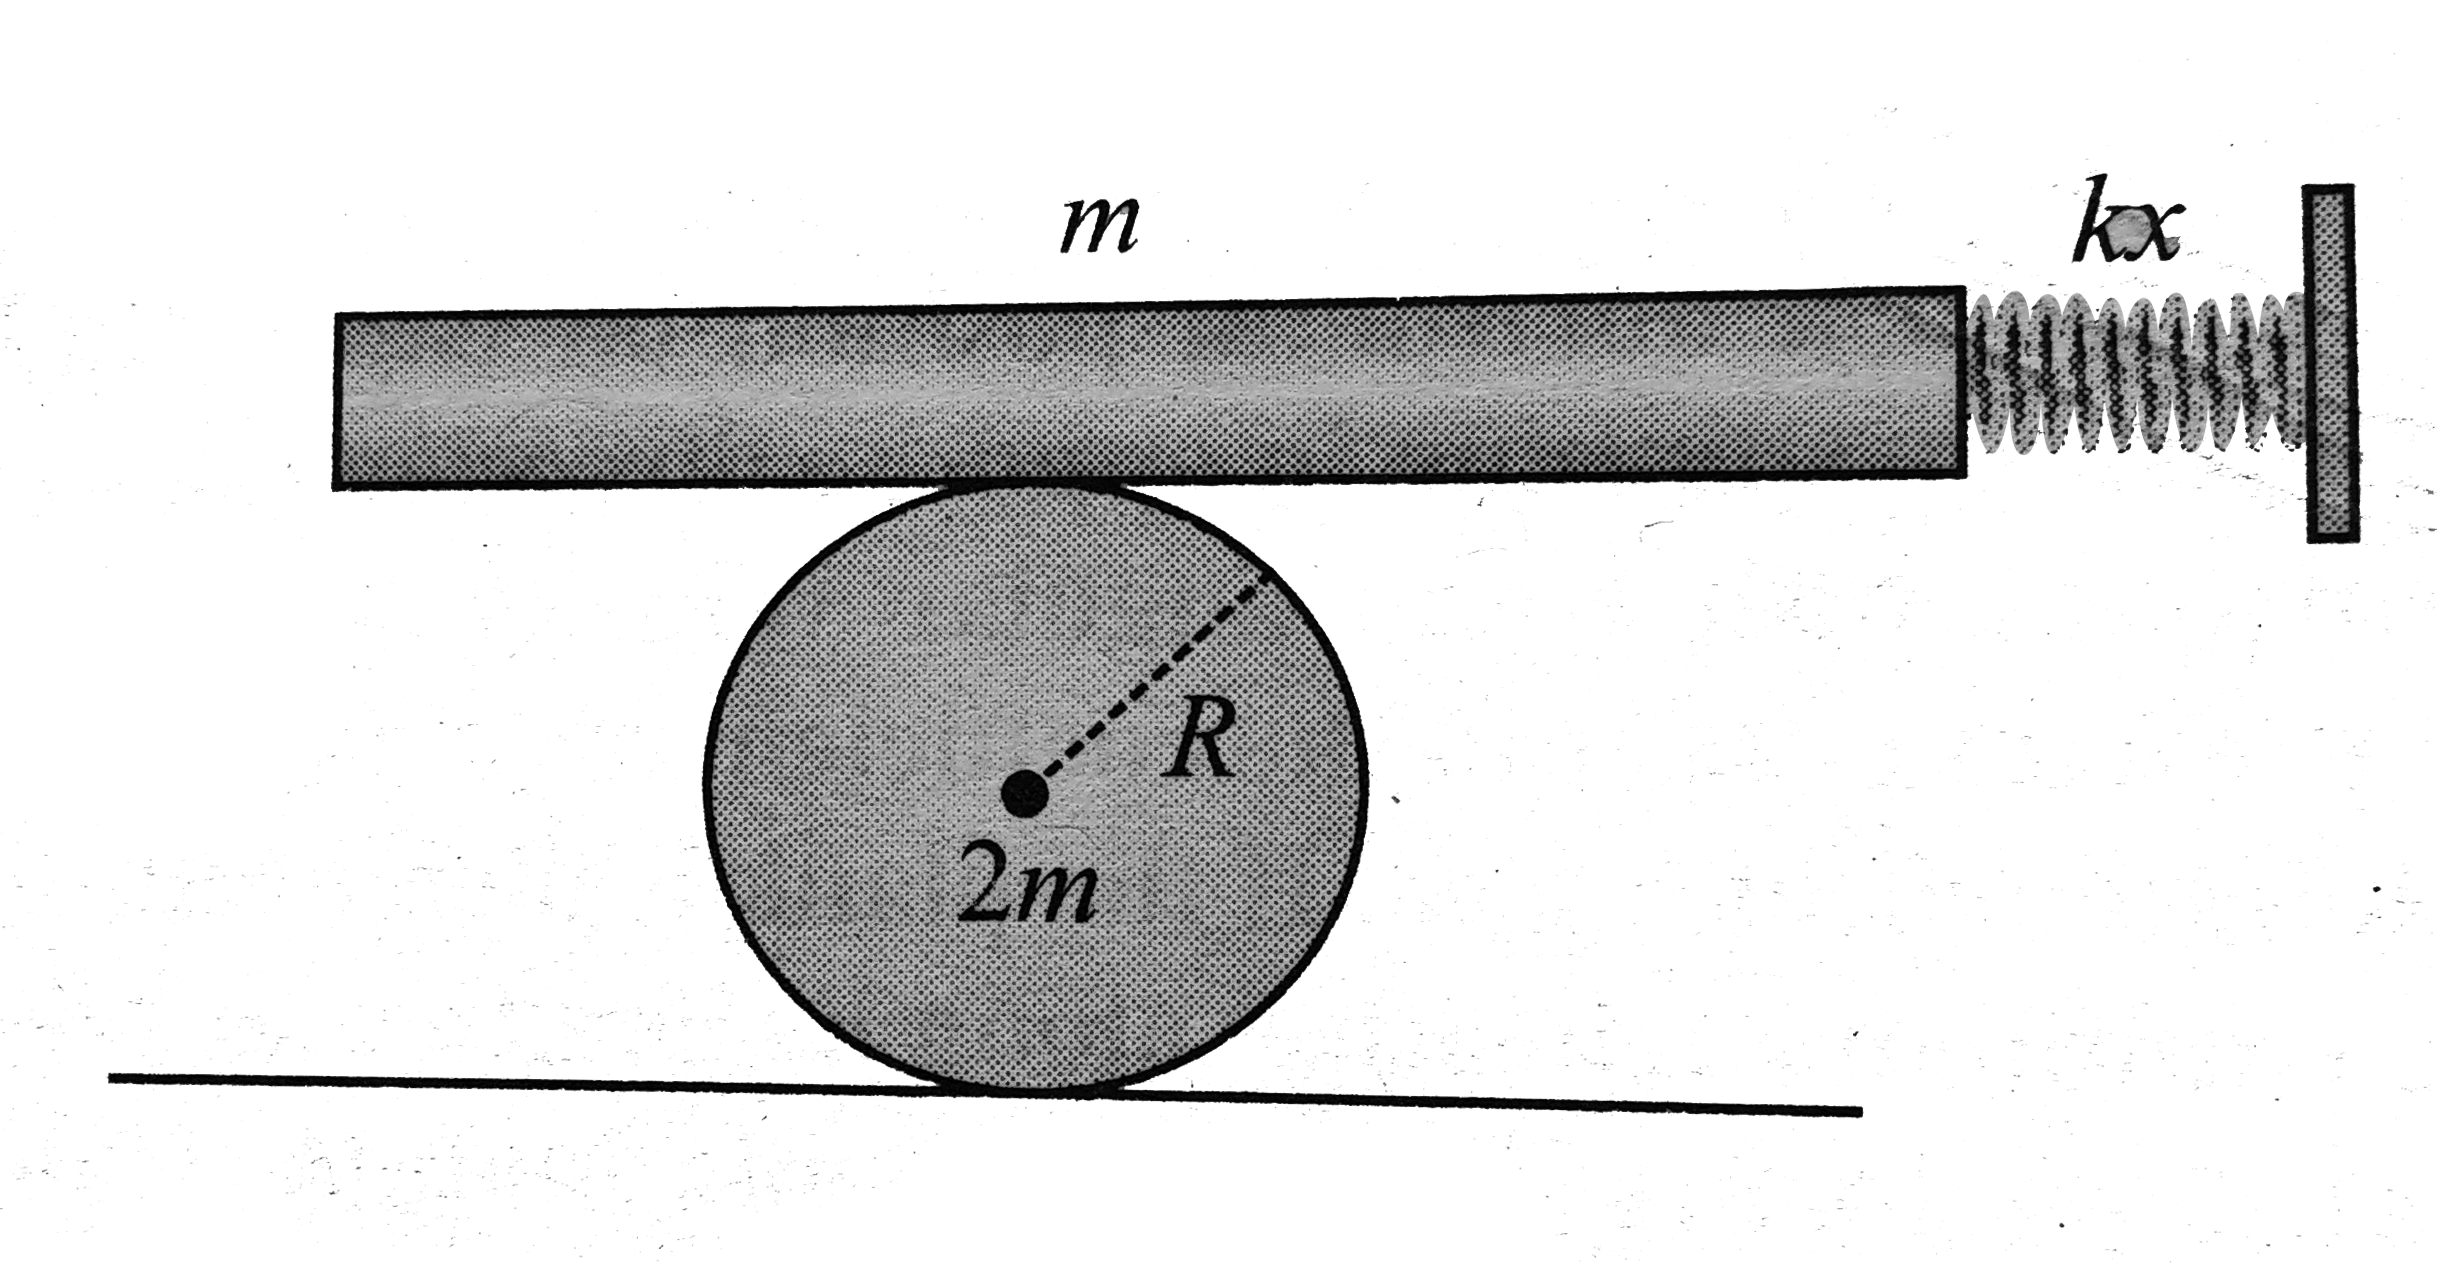 A uniform plank  of mass m, free to move in the horizontal direction only , is placed at the top of a solid cylinder of mass 2 m and radius R. The plank is attached to a fixed wall by mean of a light spring constant k. There is no slipping between the cylinder and the plank , and between the cylinder and the ground. Find the time period of small oscillation of the system.